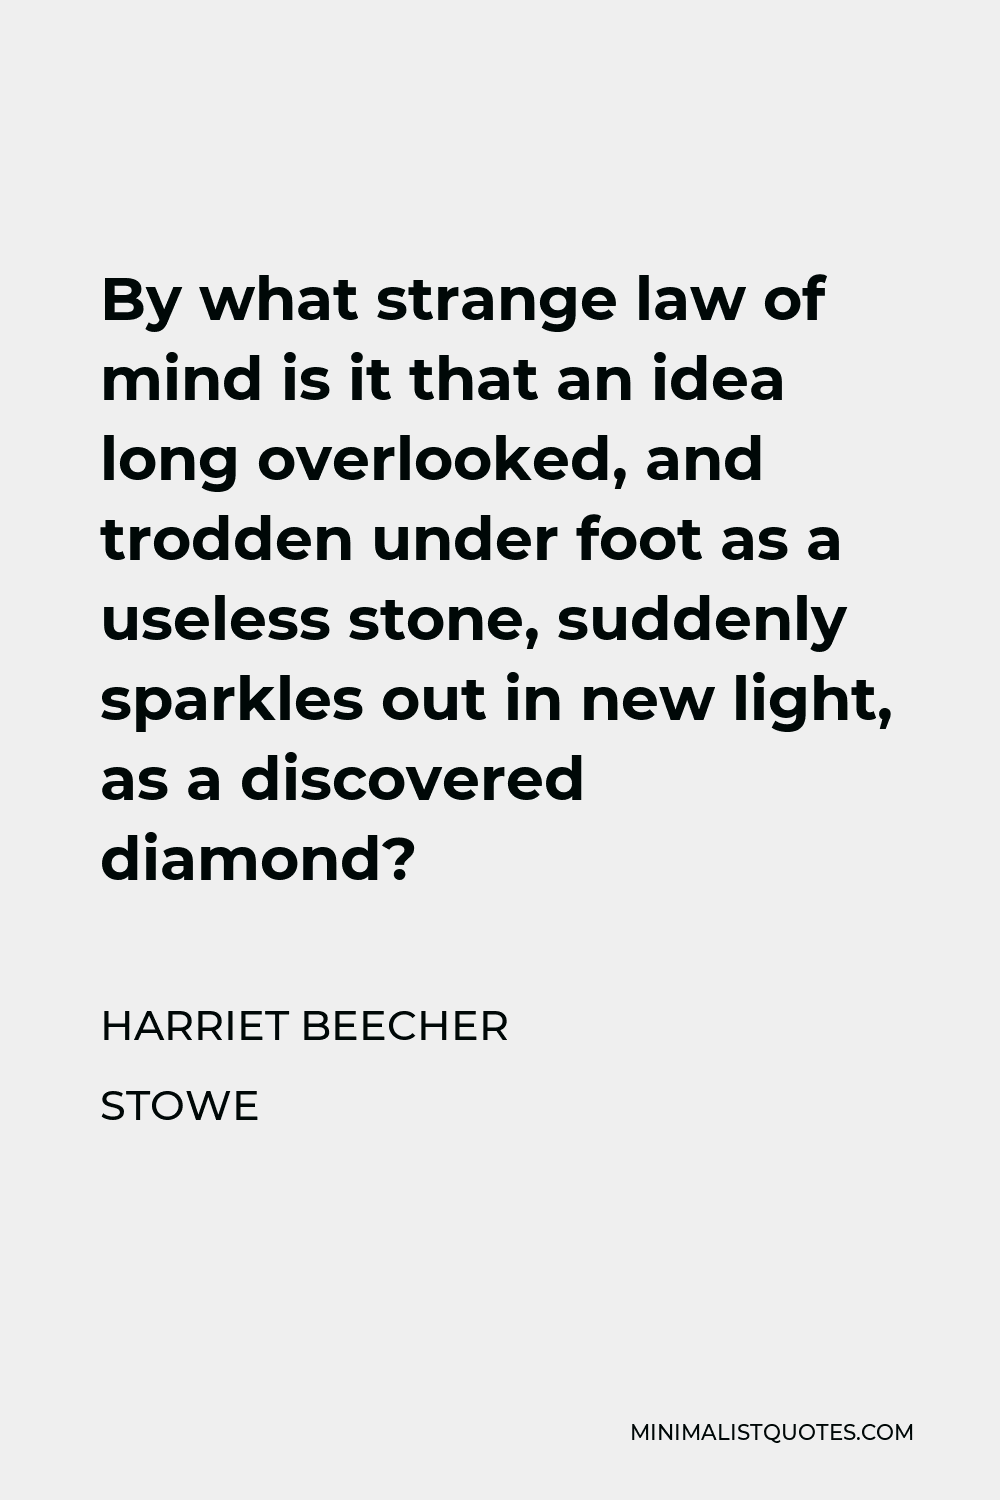 Harriet Beecher Stowe Quote - By what strange law of mind is it that an idea long overlooked, and trodden under foot as a useless stone, suddenly sparkles out in new light, as a discovered diamond?